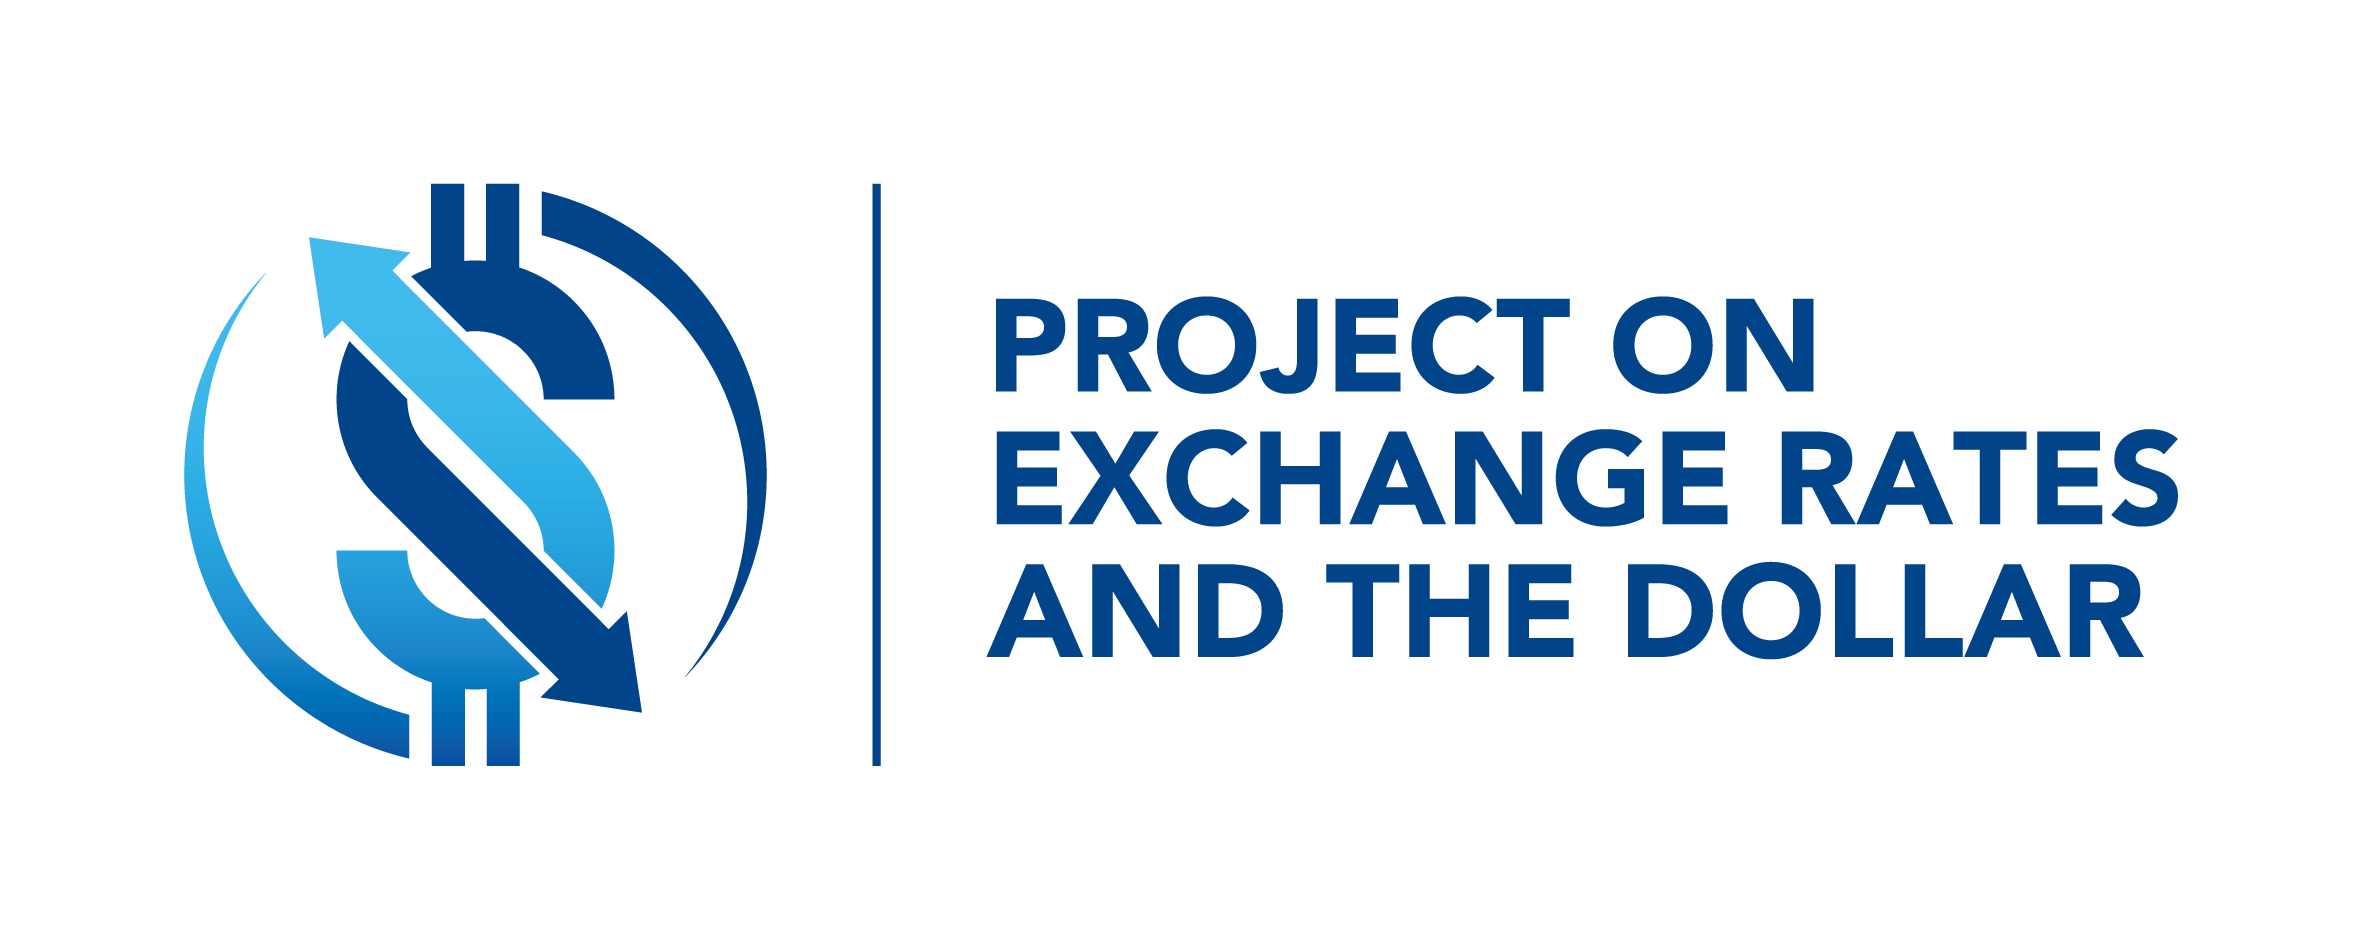 Dollar Logo - Project on Exchange Rates and the Dollar Logo AW Kemp Foundation